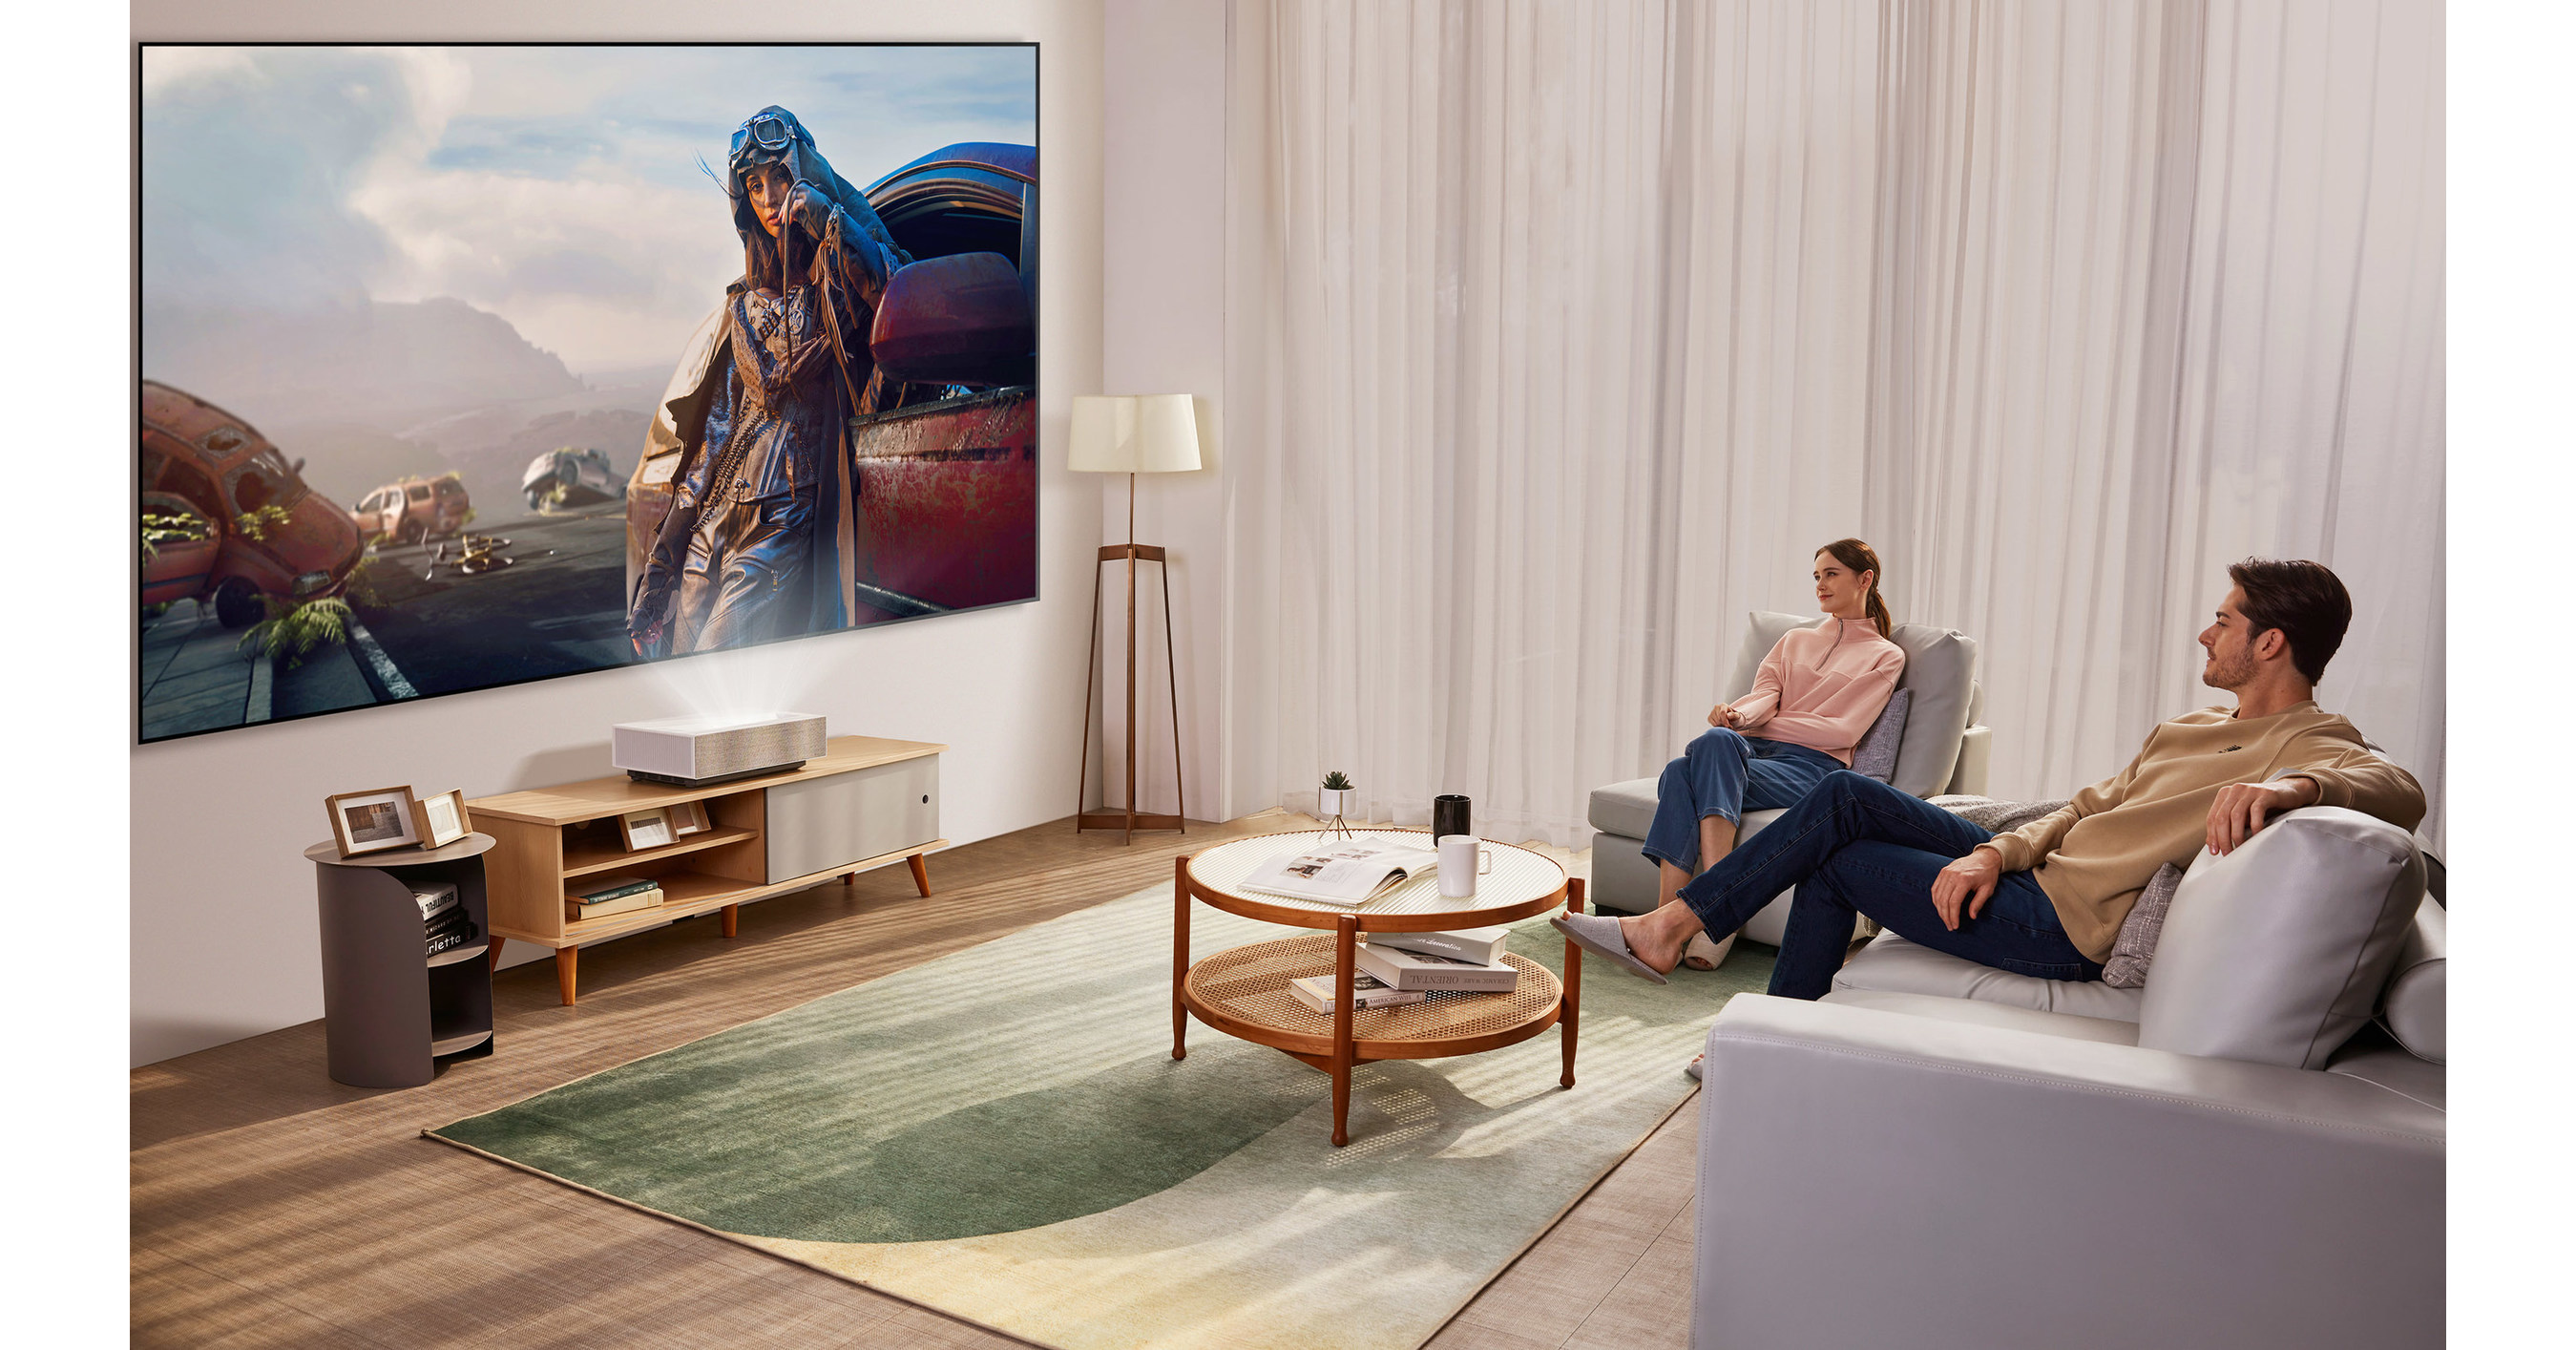 LG Announces New 4K Lifestyle Laser Projector With Ultra-Portable